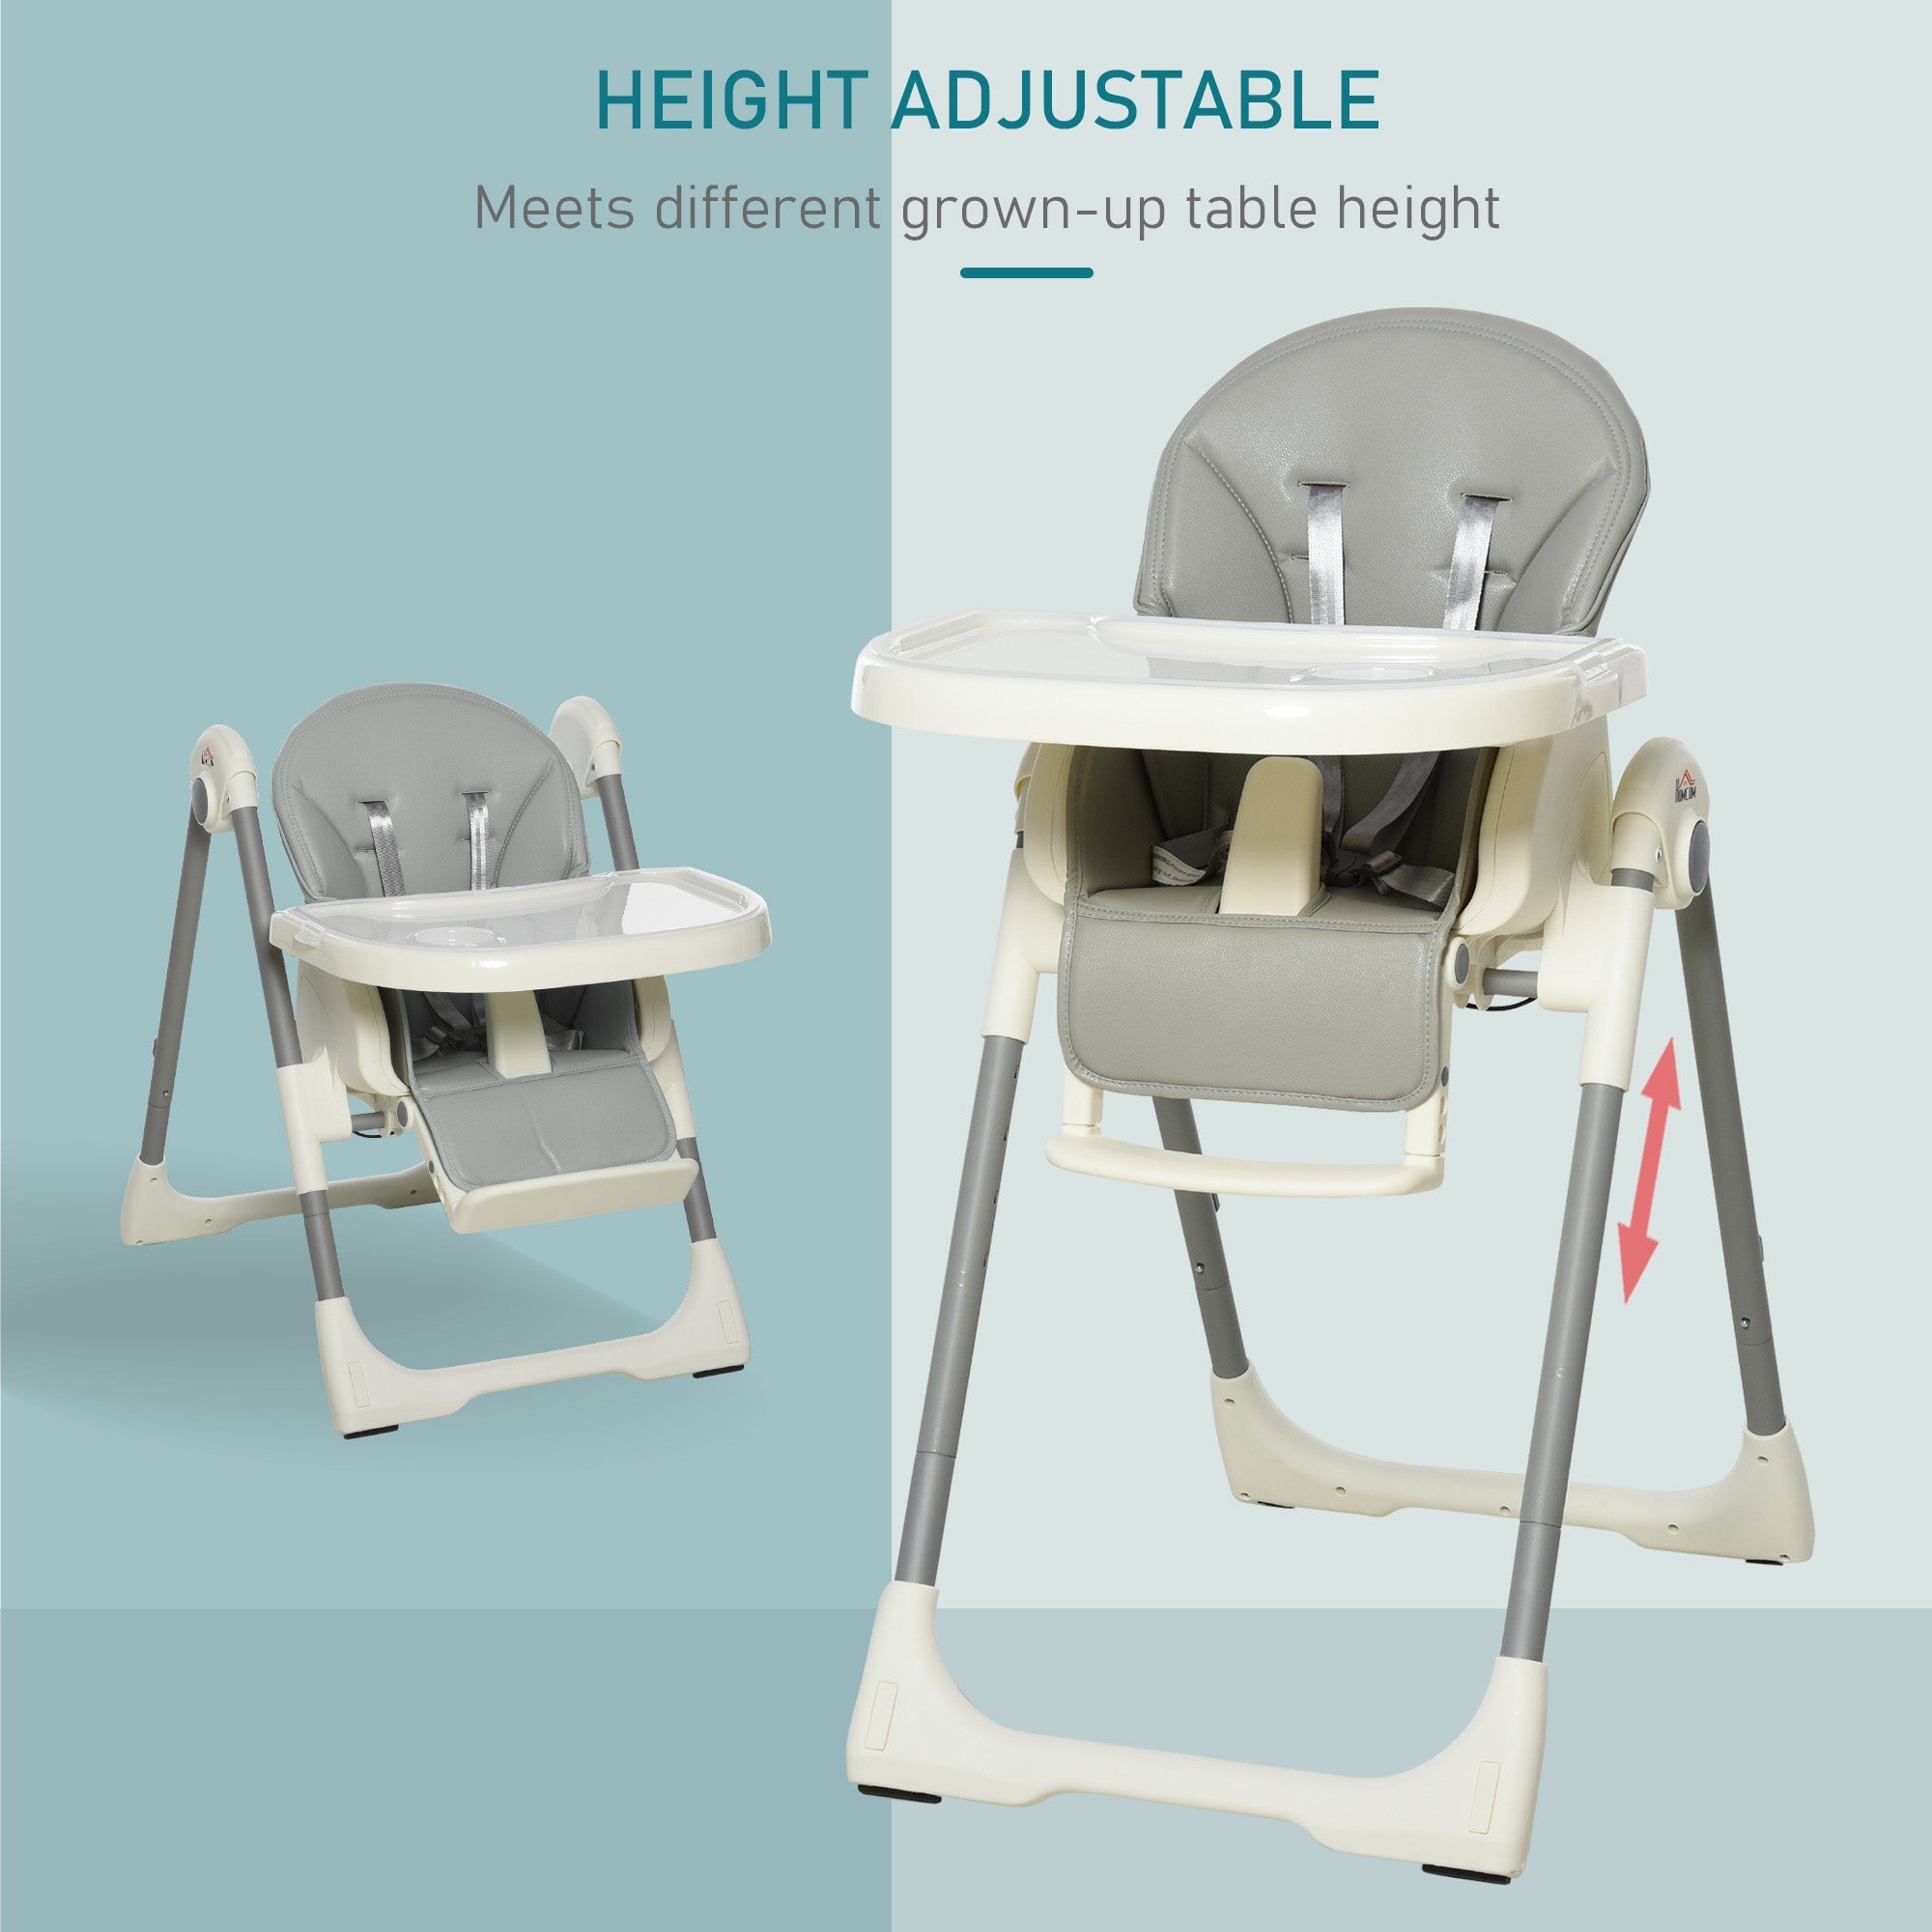 Foldable Baby High Chair Convertible to Toddler Chair Height Adjustable with Removable Tray 5-Point Harness Mobile with Wheels Grey-3